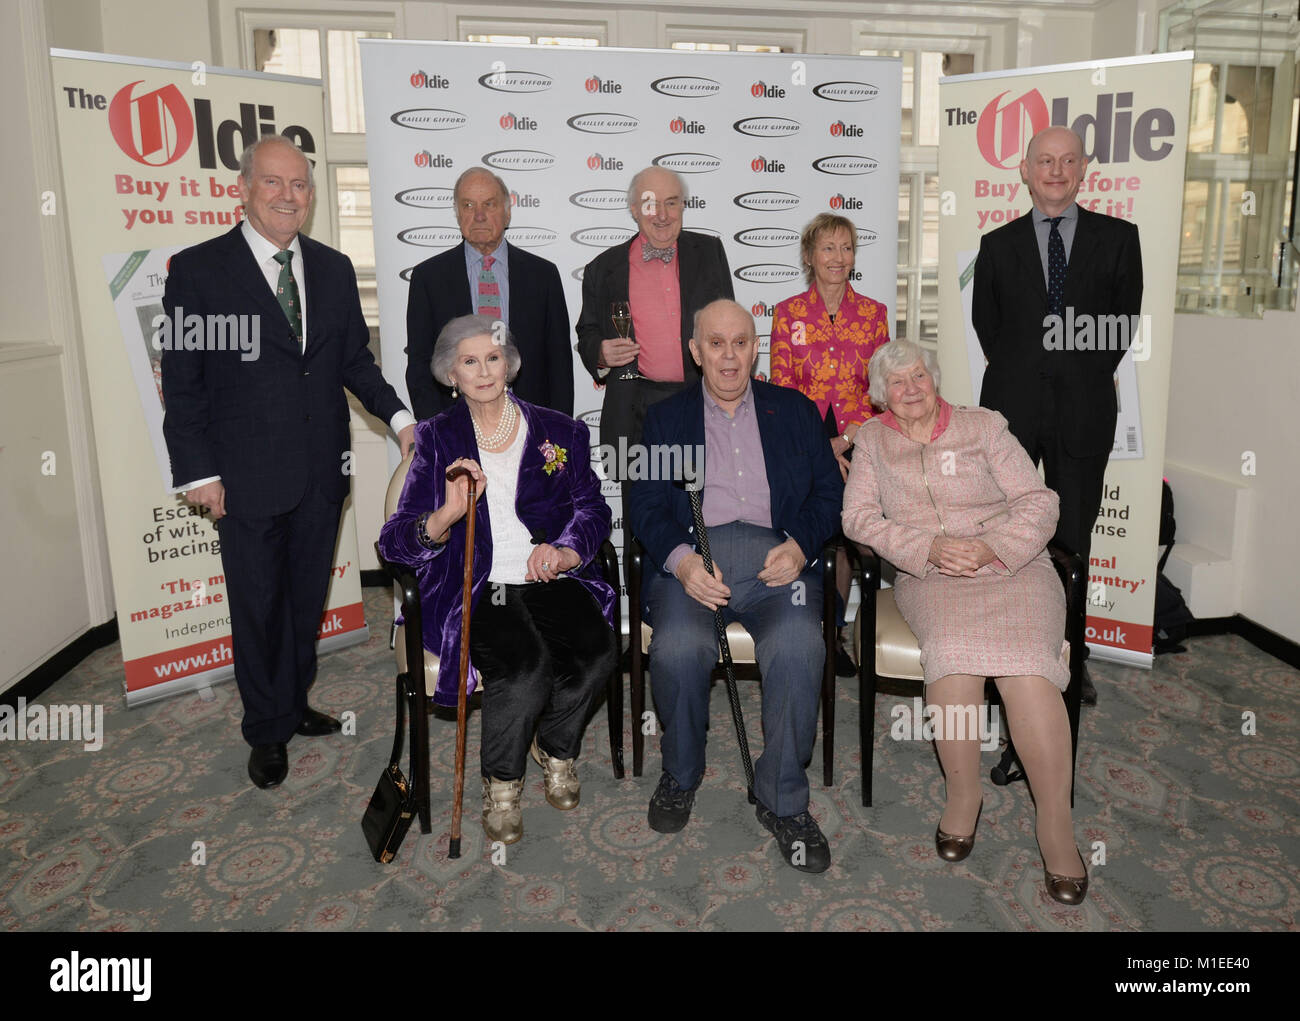 (back row left to right) Gyles Brandreth, Geoffrey Palmer, Henry Blofeld, Virginia Lewis-Jones, (unknown), (front row left to right) April Ashley, Alan Ayckbourn and Baroness of Crosby Shirley Williams attending The Oldie of the Year Awards, at Simpsons in the Strand, central London. Stock Photo